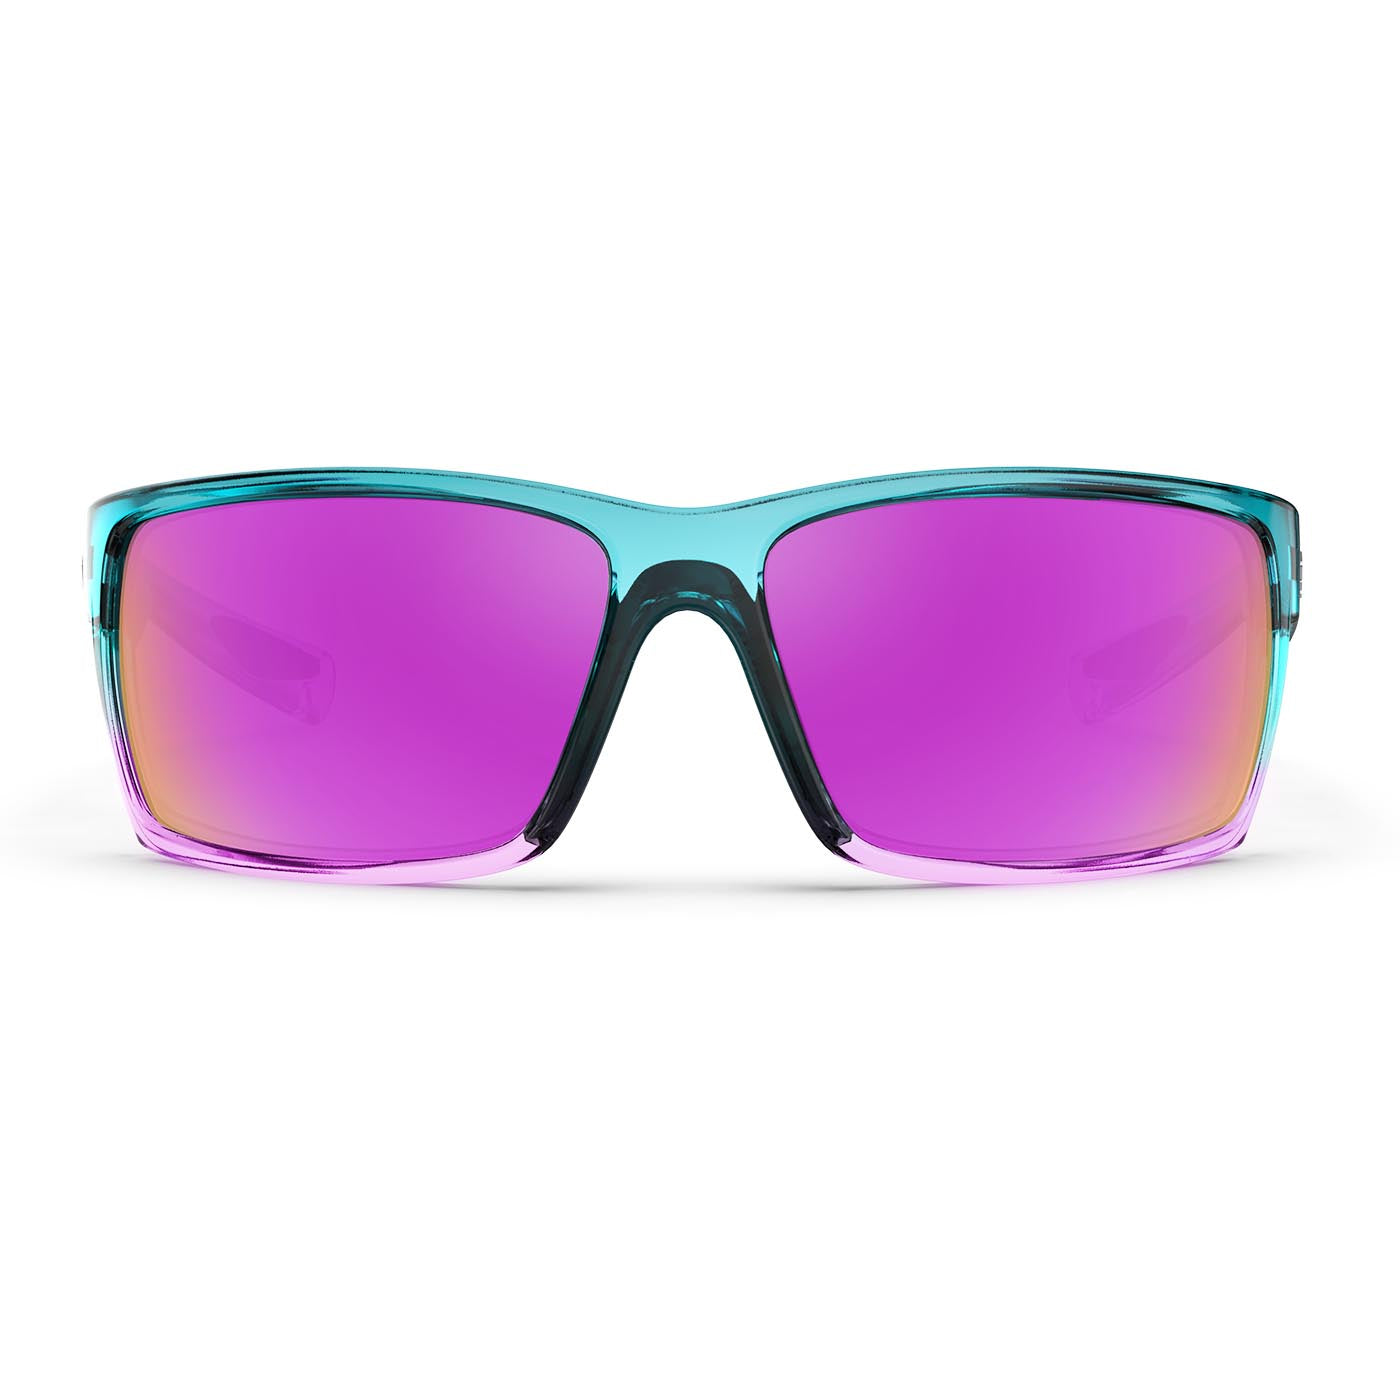 Torege® Official Store: Sunglasses, Goggles & Accessories